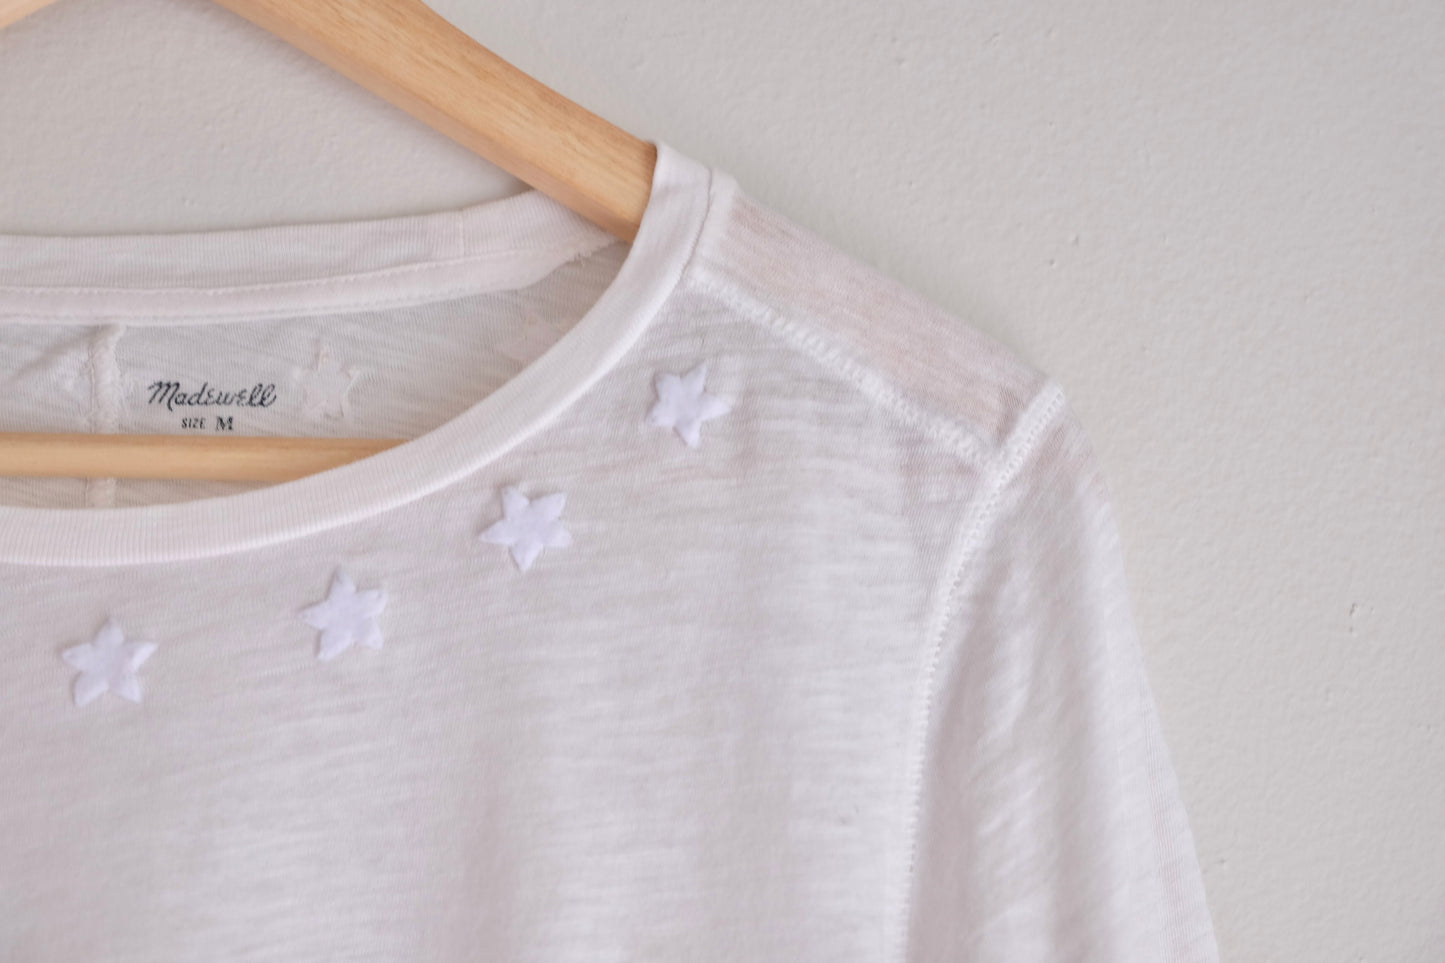 white long sleeve with stars